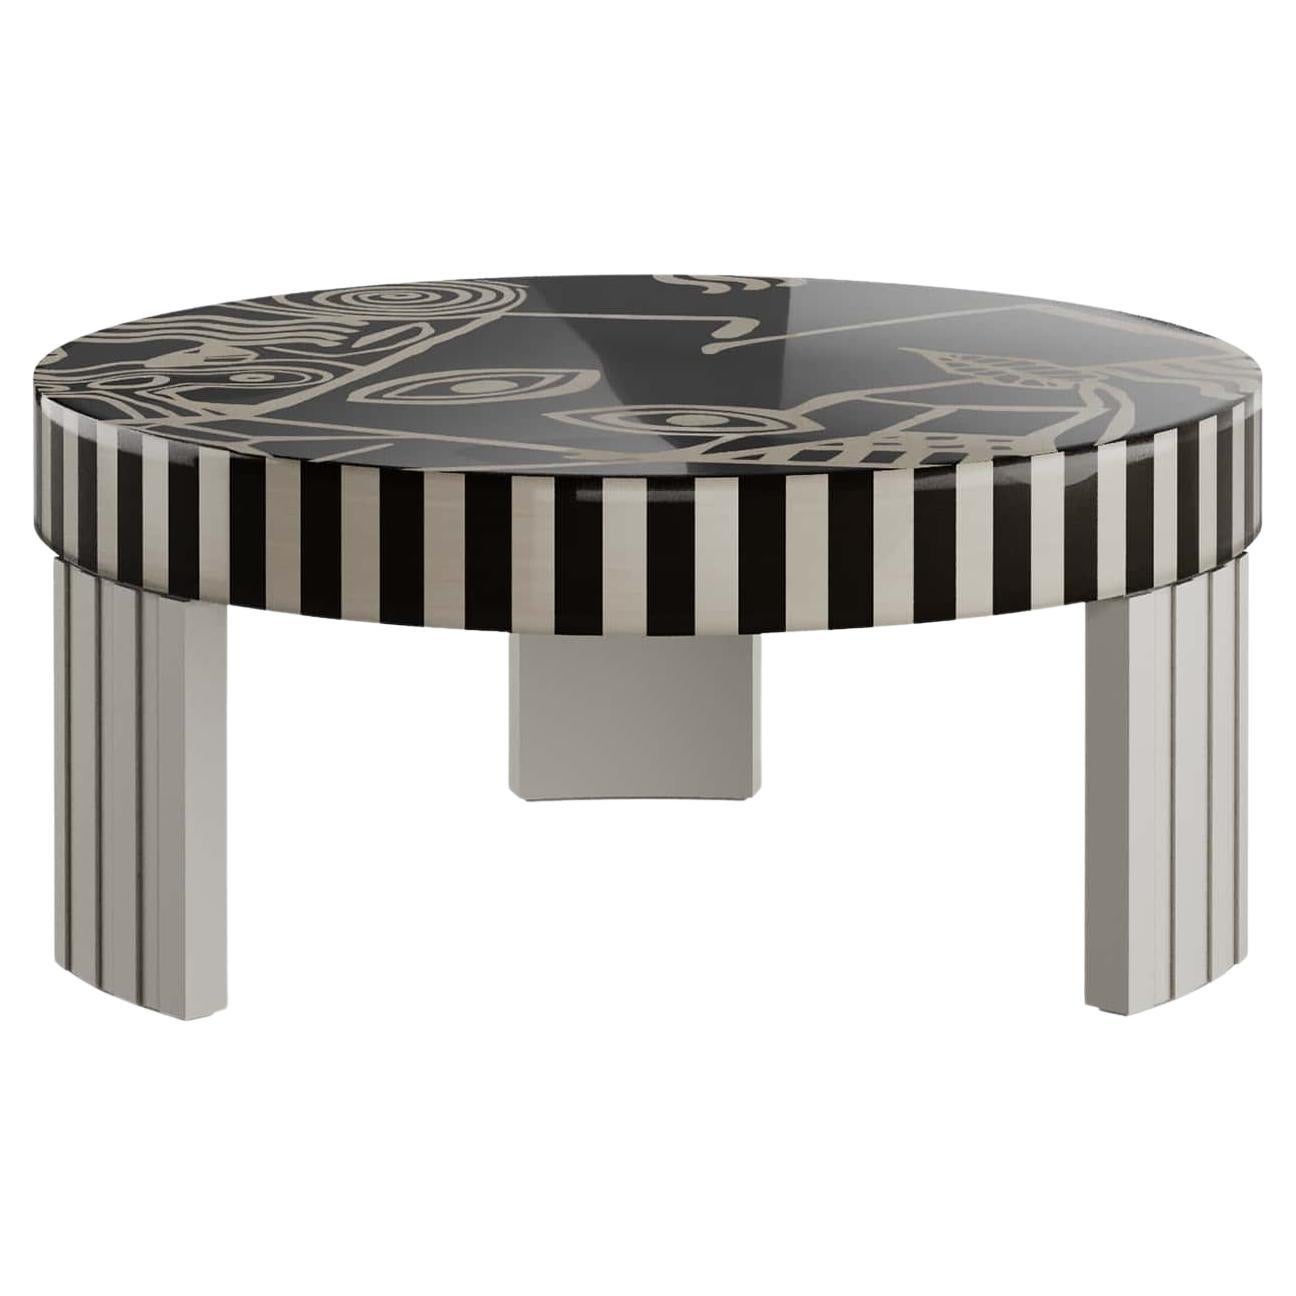 Contemporary Center Coffee Center Table in Natural Oak Veneer and Gloss Black